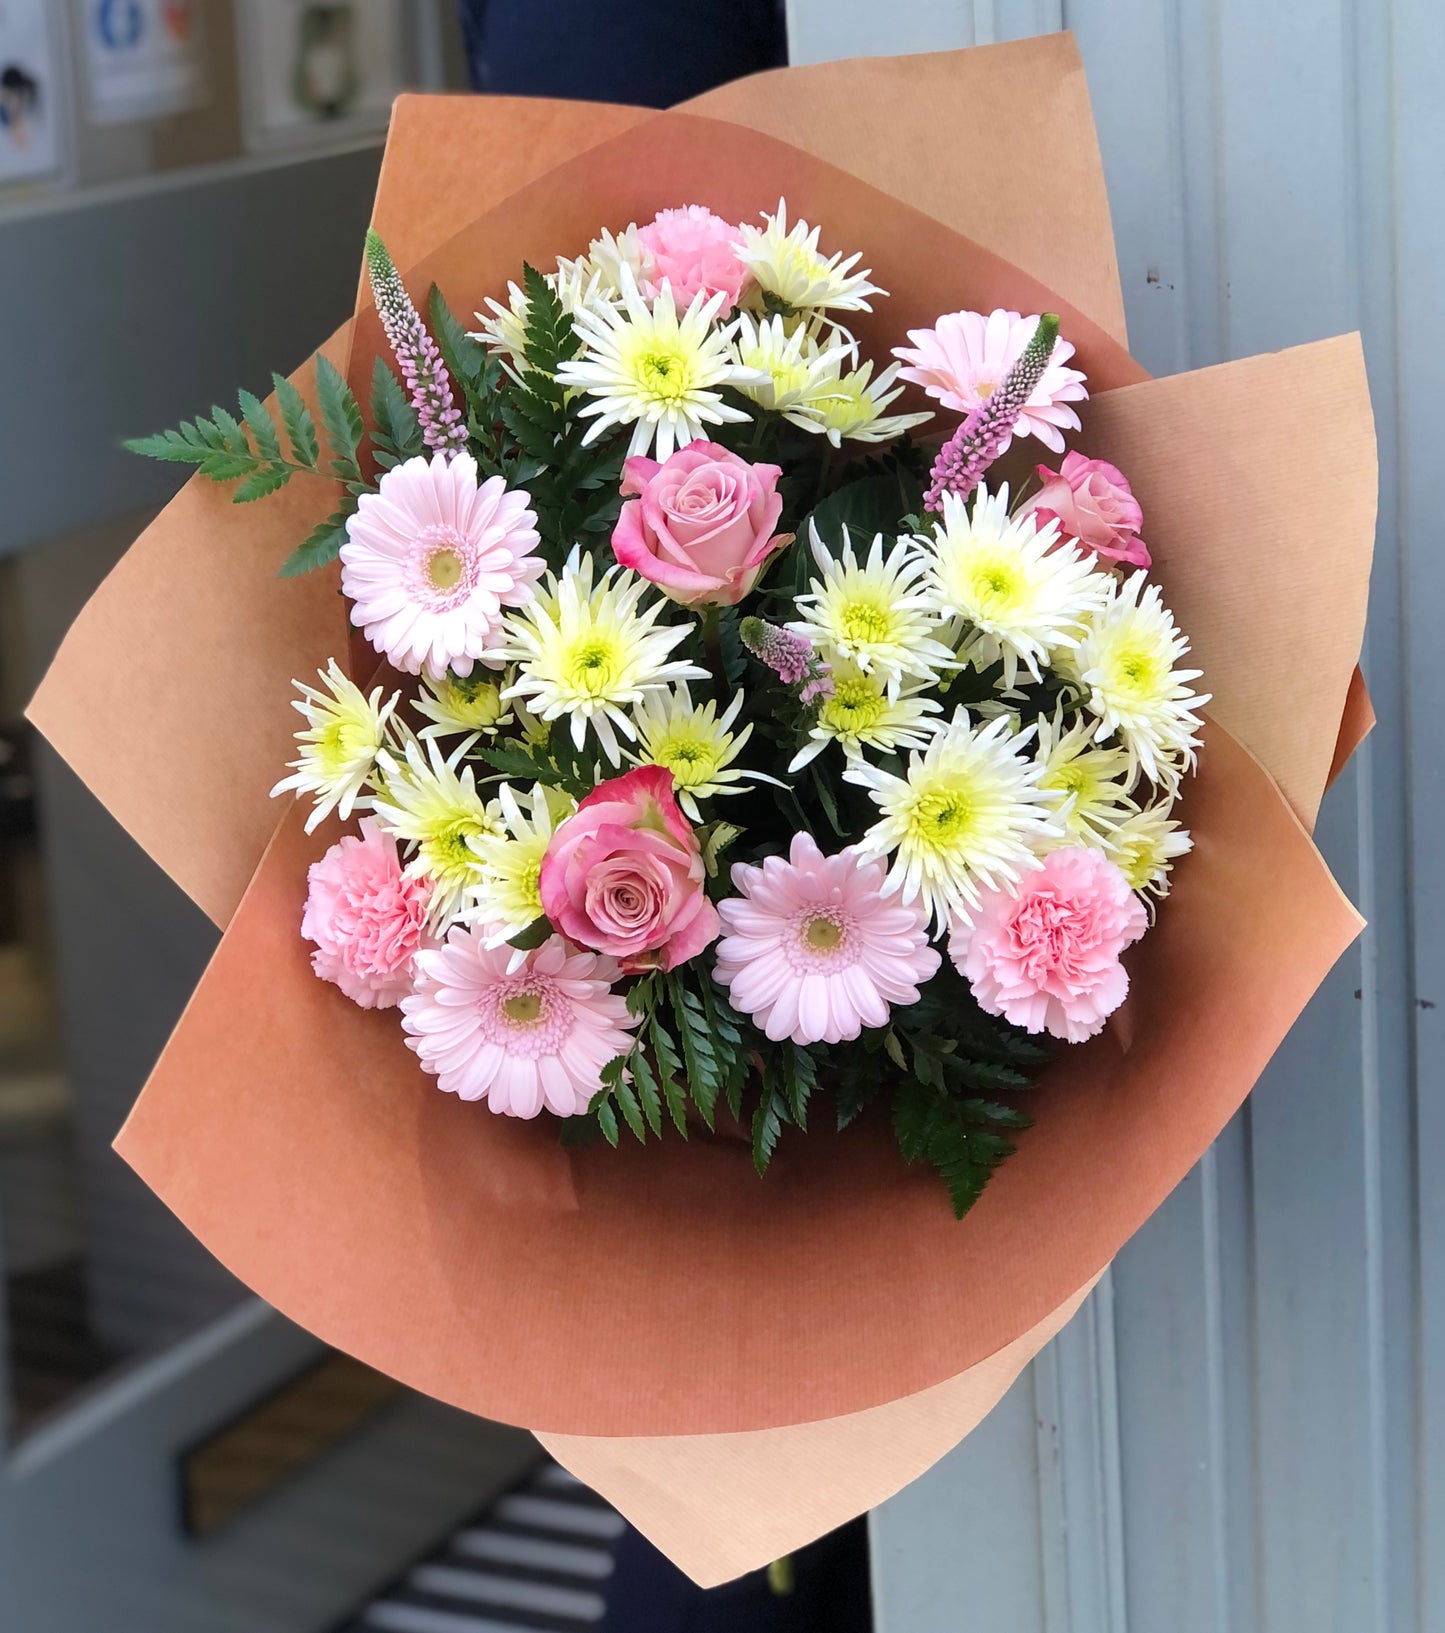 Flowers delivered to your door once a month for 6 Months with the purchase of a Subscription